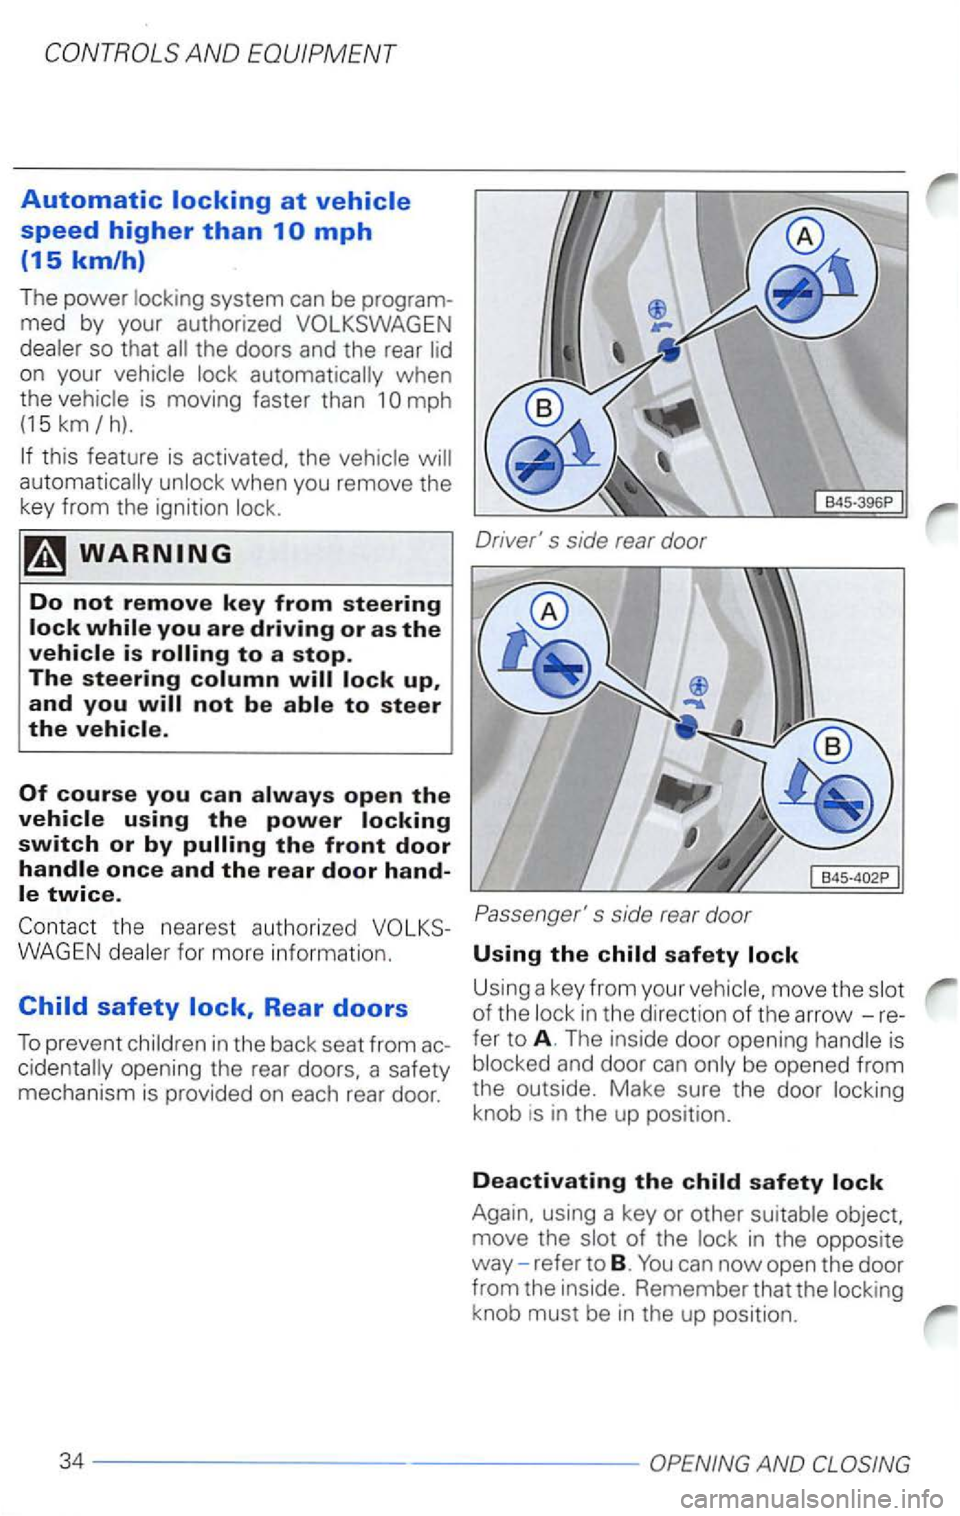 VOLKSWAGEN PASSAT 1997  Owners Manual the doors  and the rear 
when 
t h e 
is  moving  faster than 1 
in  the  back  seat from 
move  the 
knob  is  in  the  up pos ition. 
Deactivating the child s afety lock 
Again.  using a key  or oth